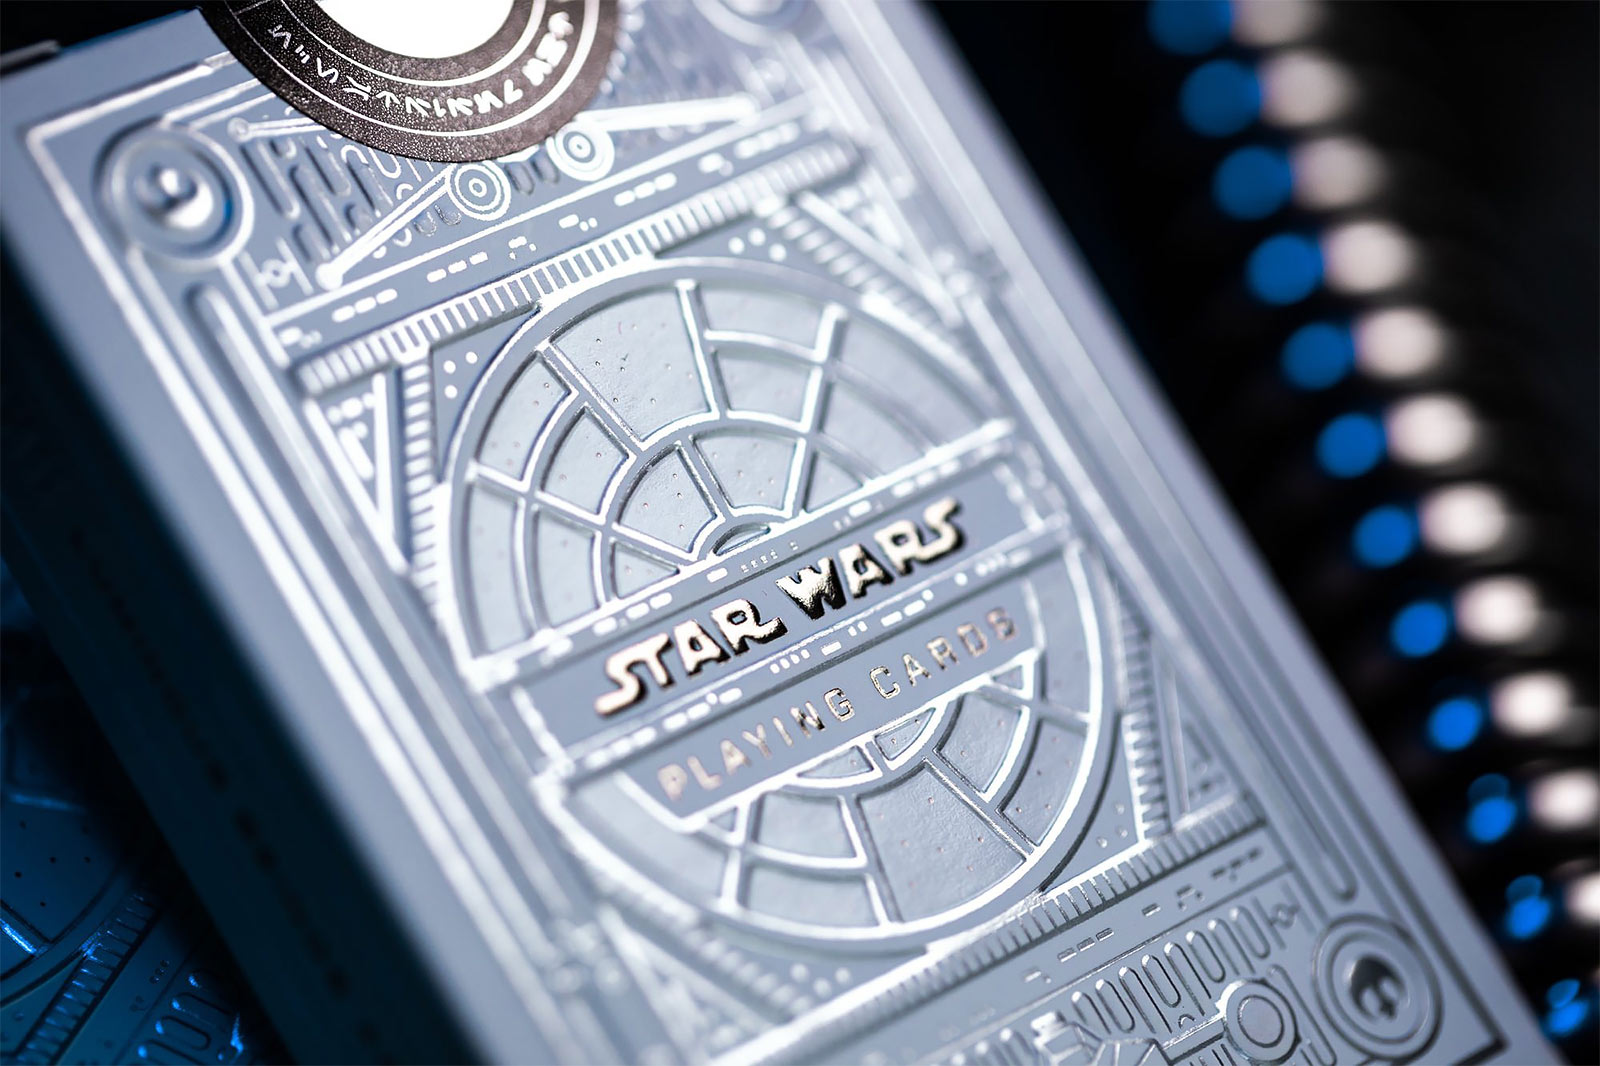 Star Wars - Light Side Card Game Silver Edition